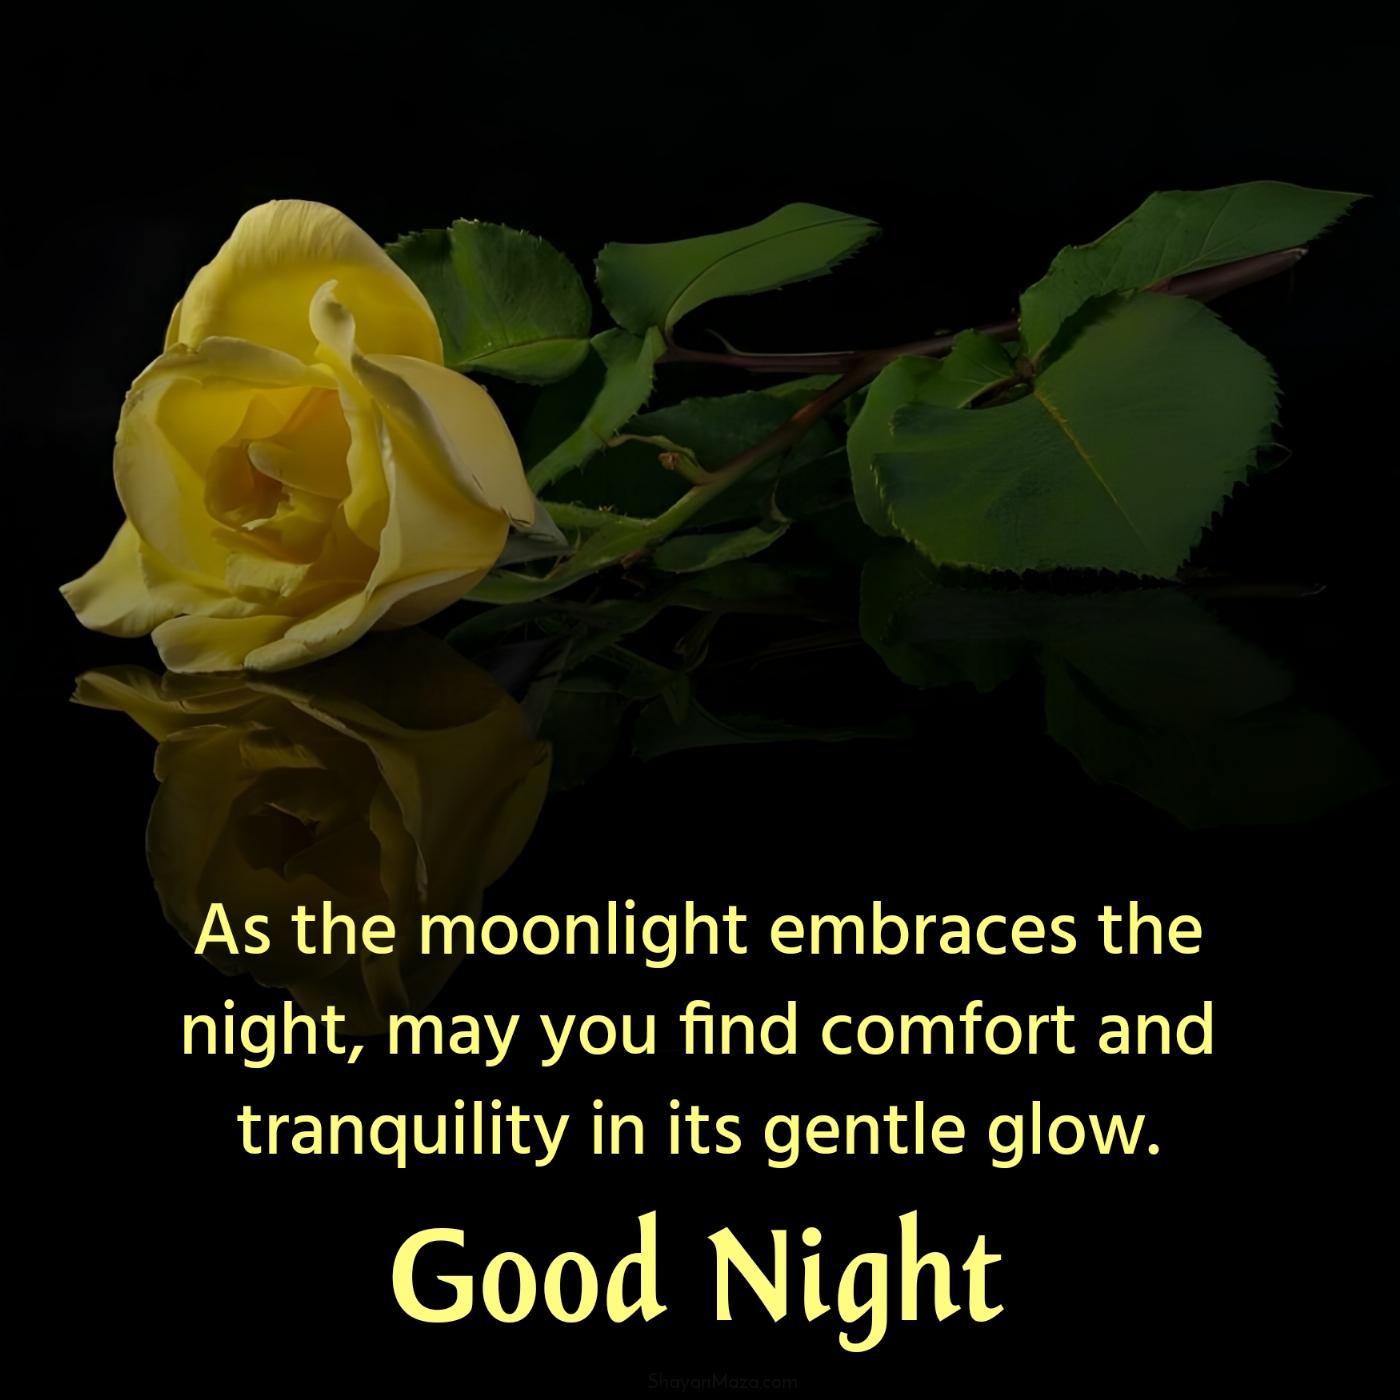 As the moonlight embraces the night may you find comfort and tranquility